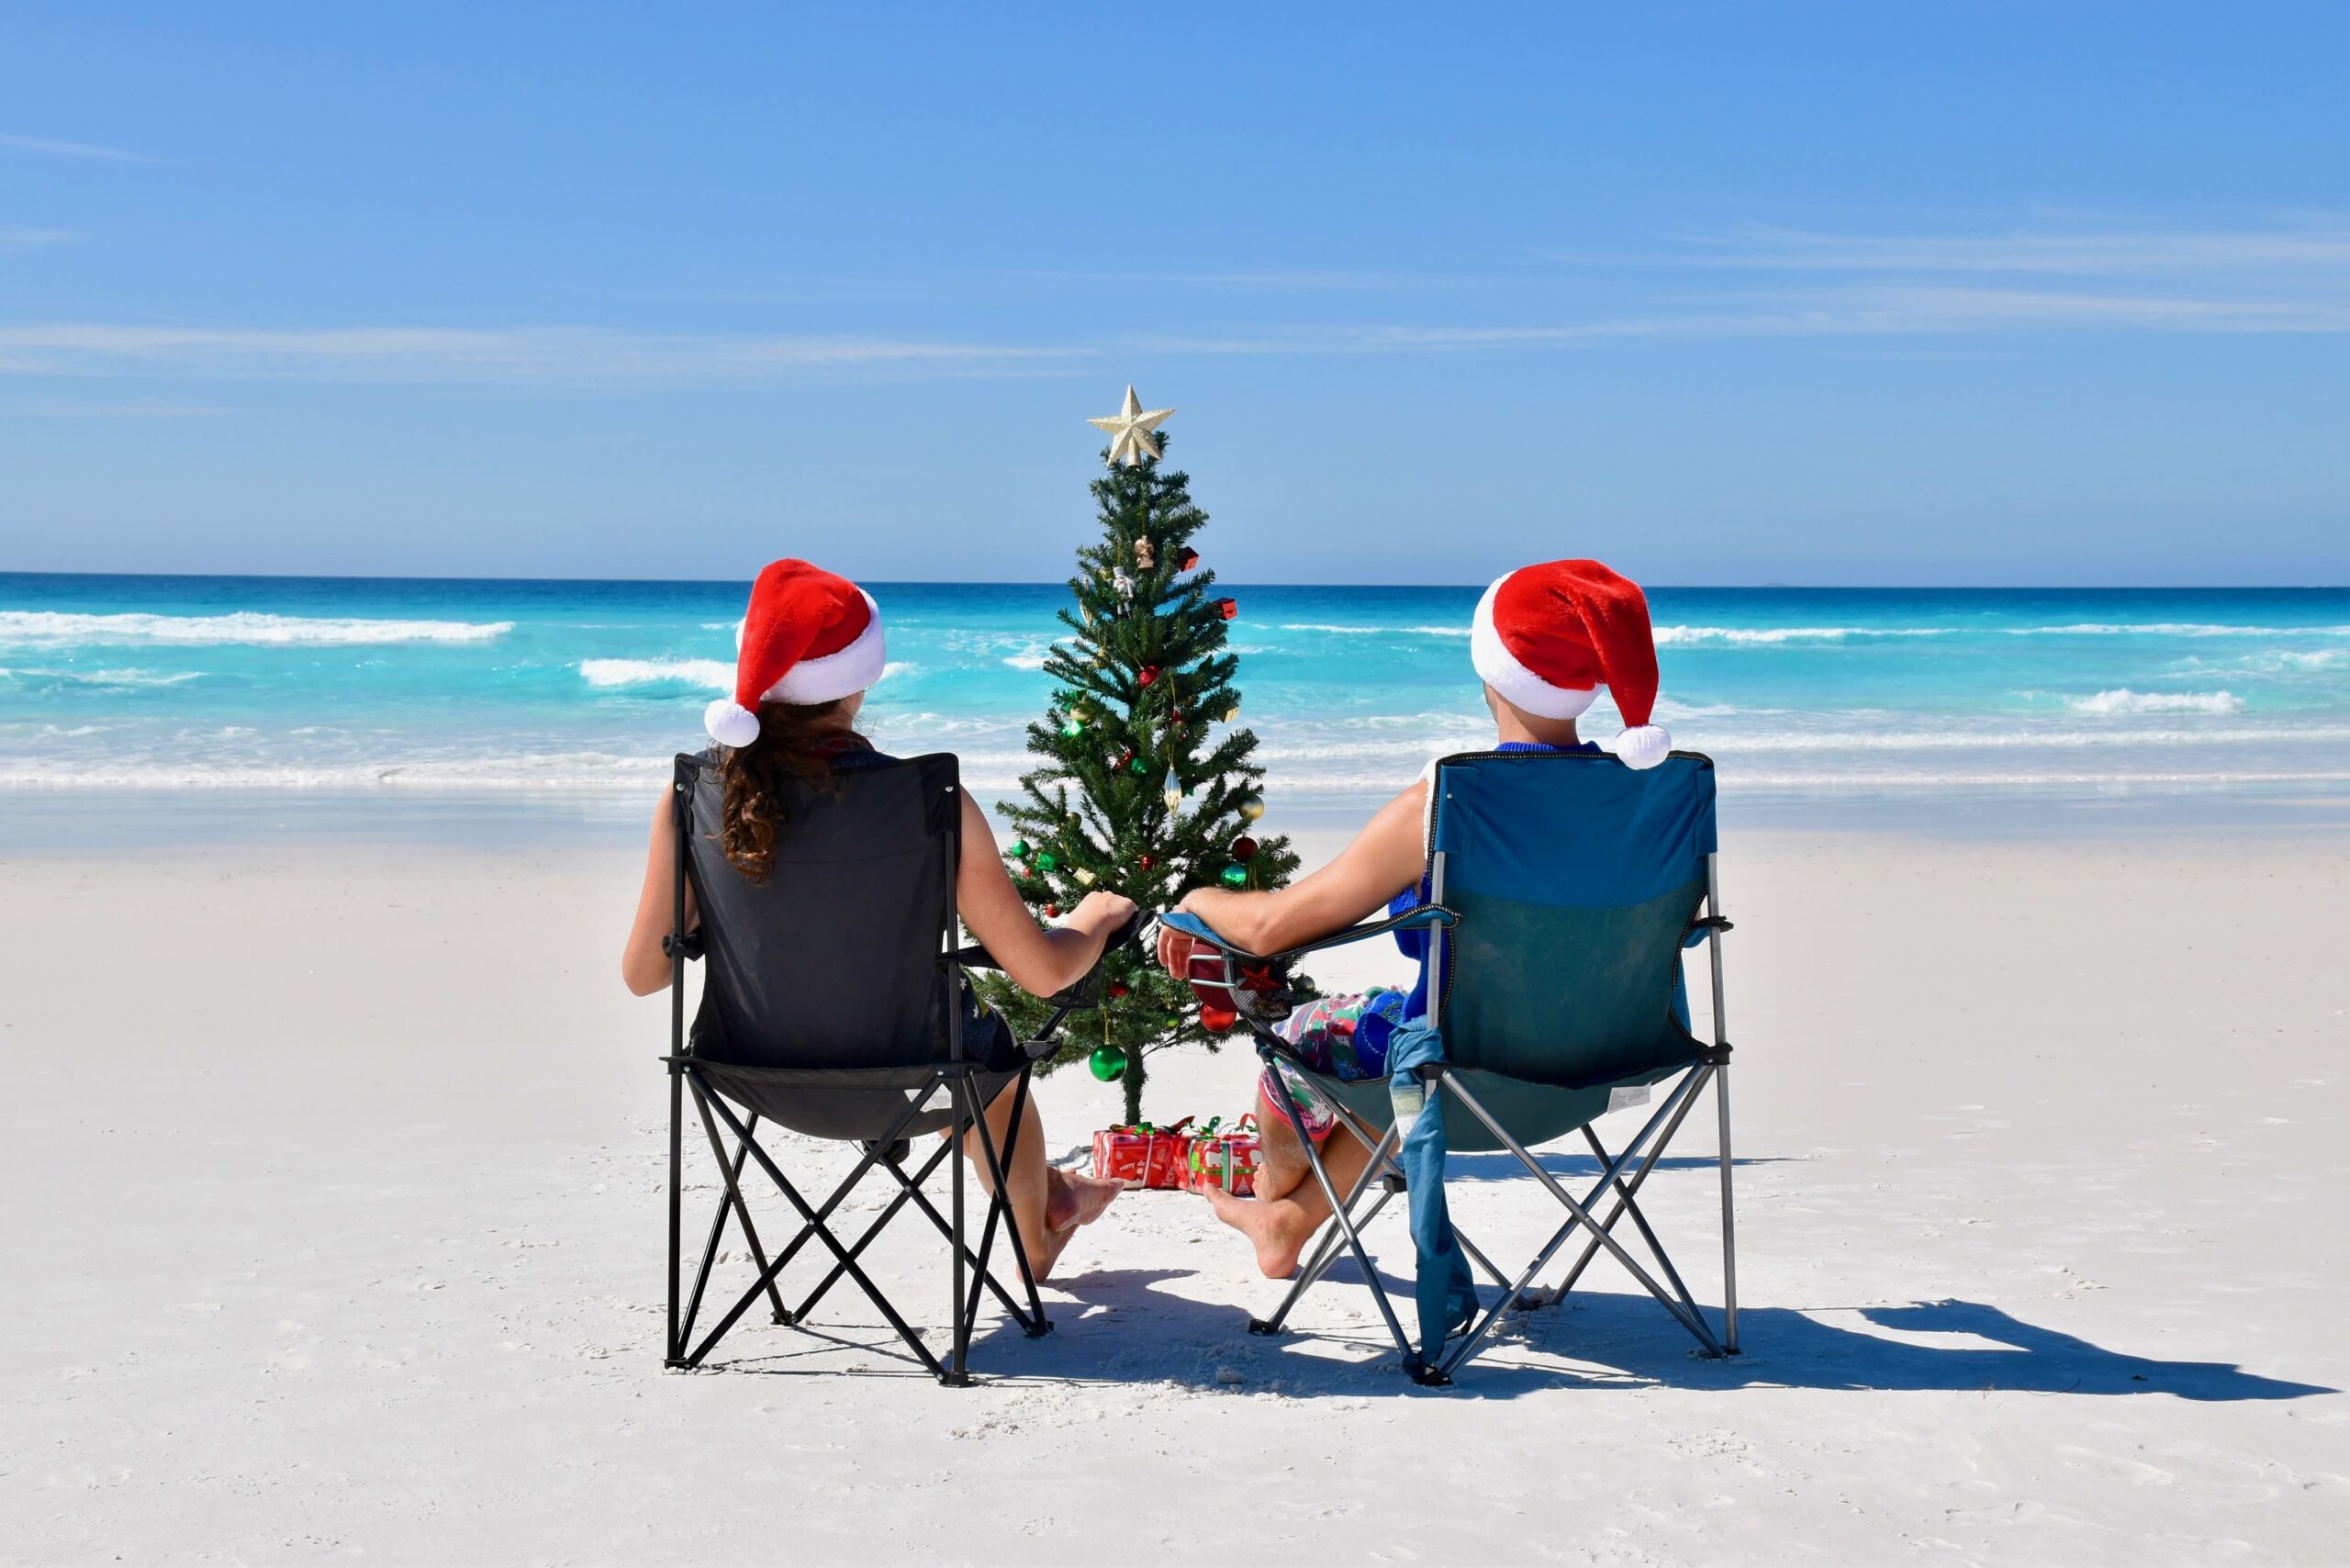 Holiday travel may rebound but overspending, uncertainty can spoil fun